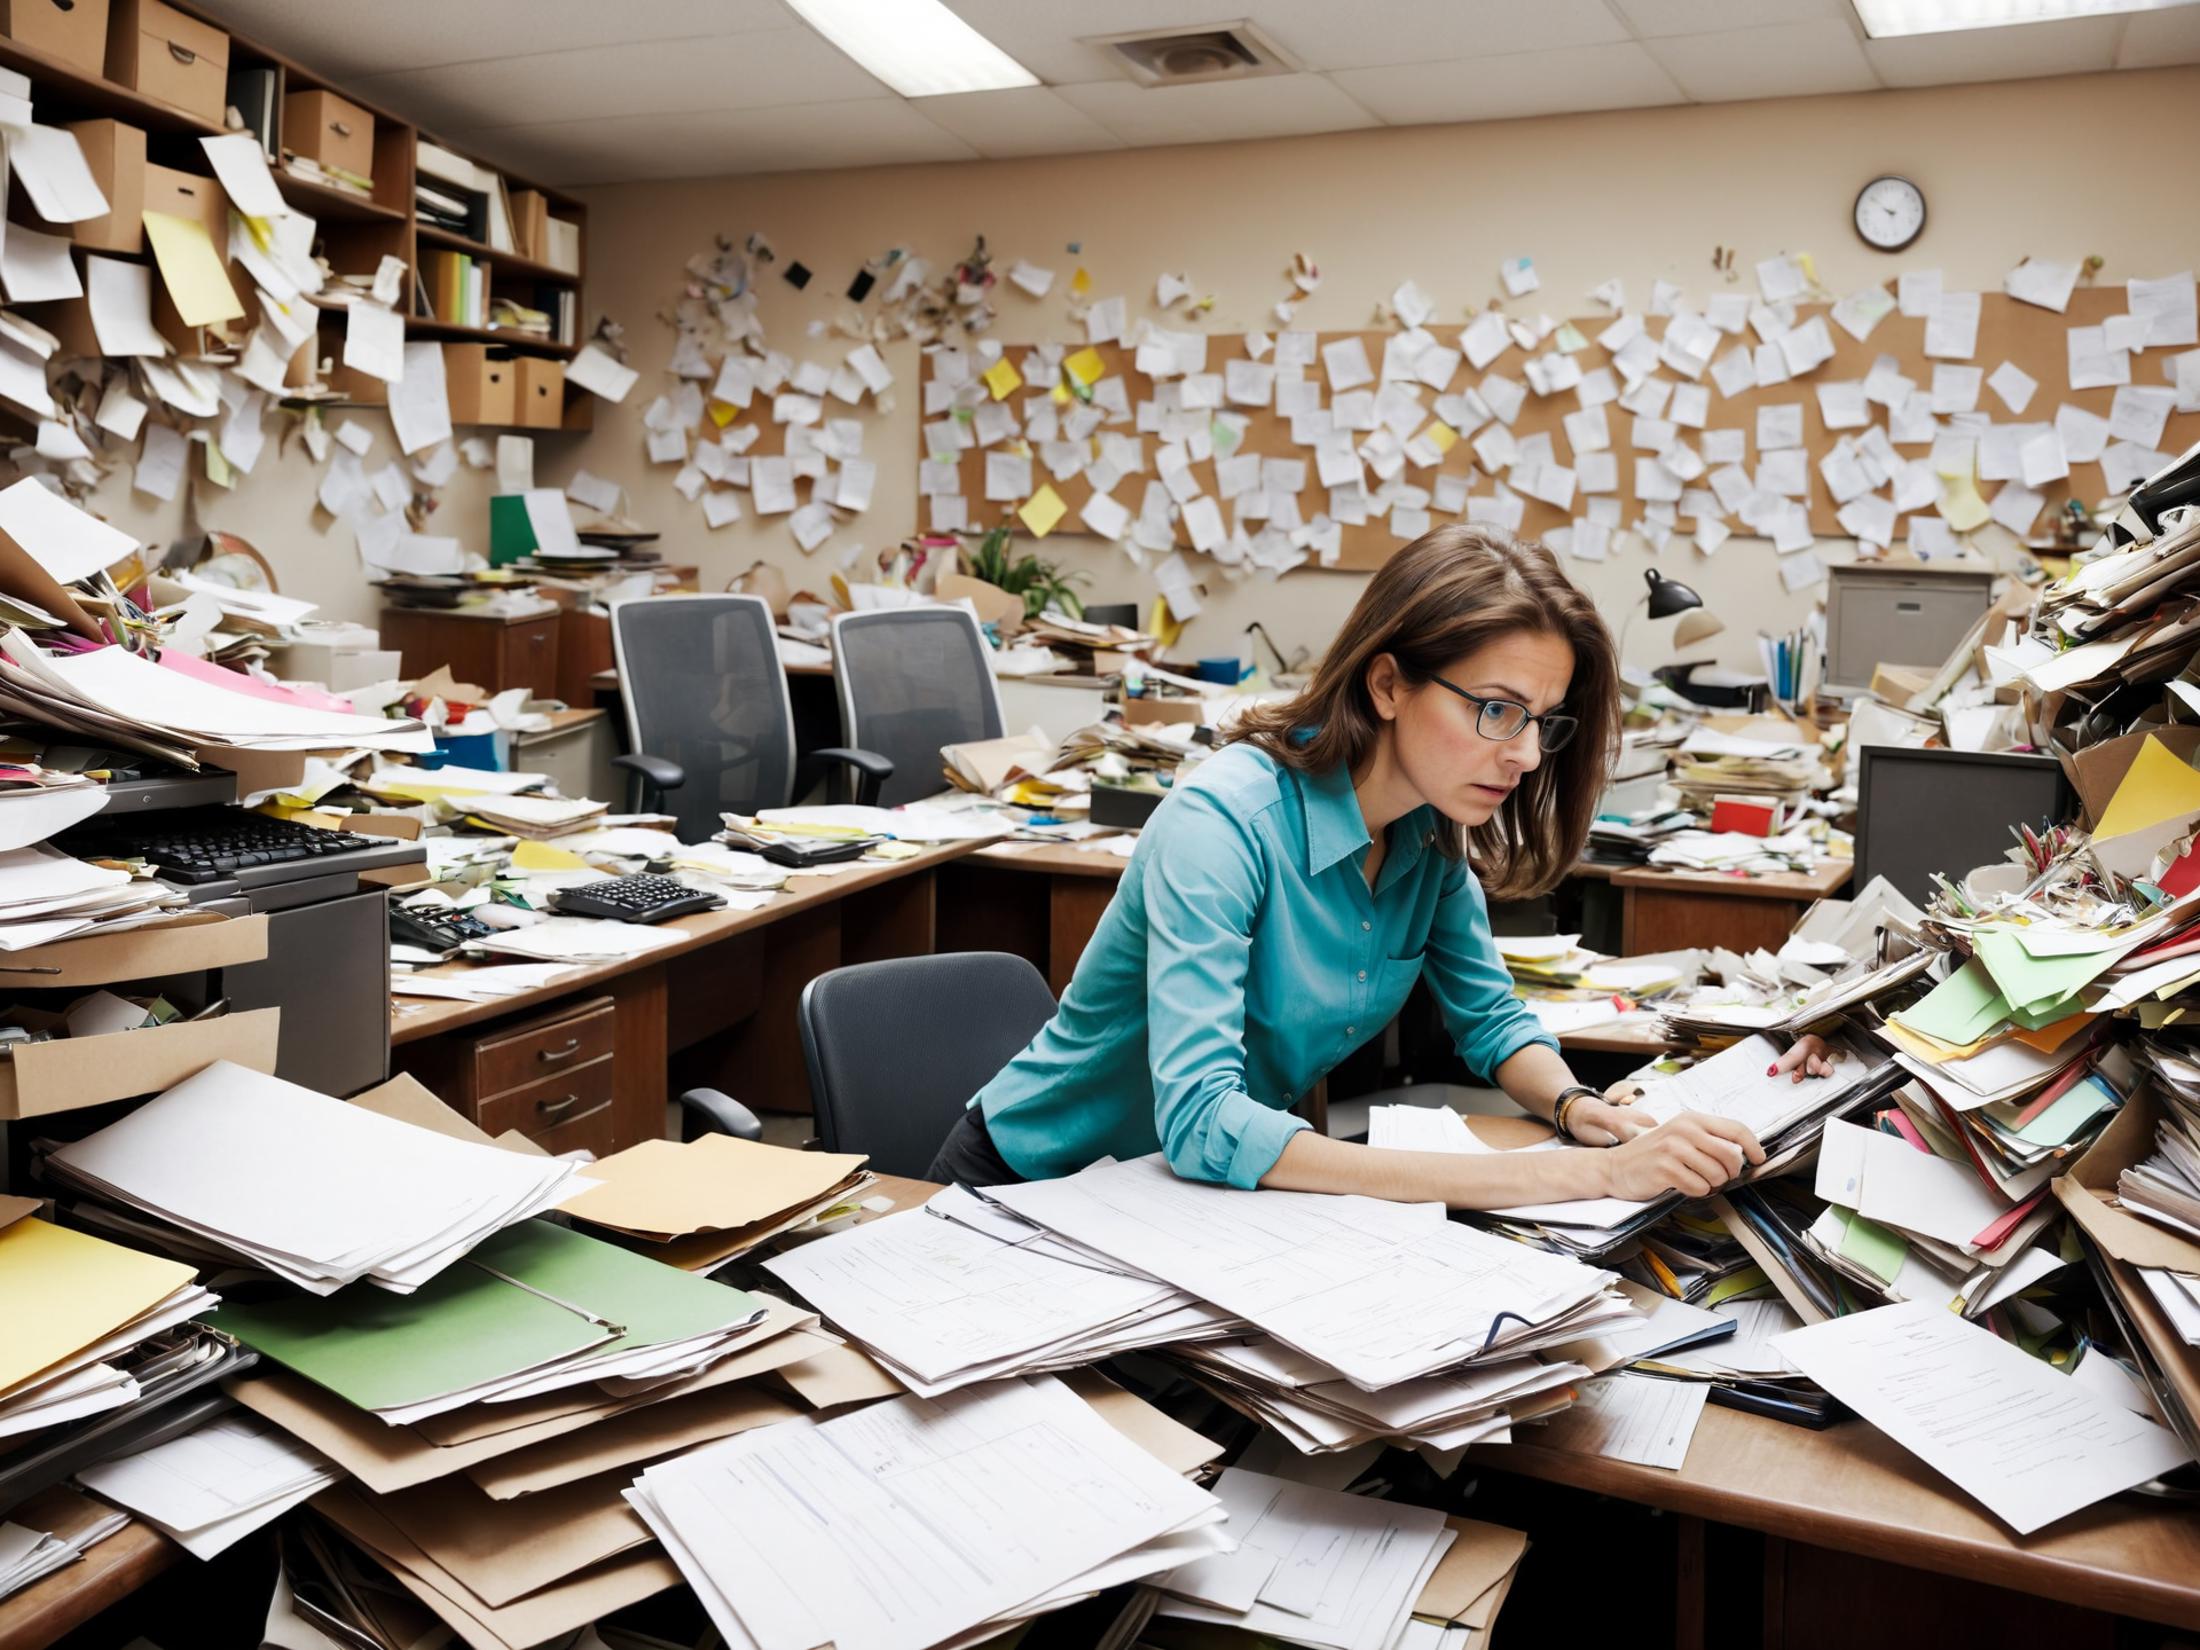 A woman working in an office surrounded by paperwork and office supplies.